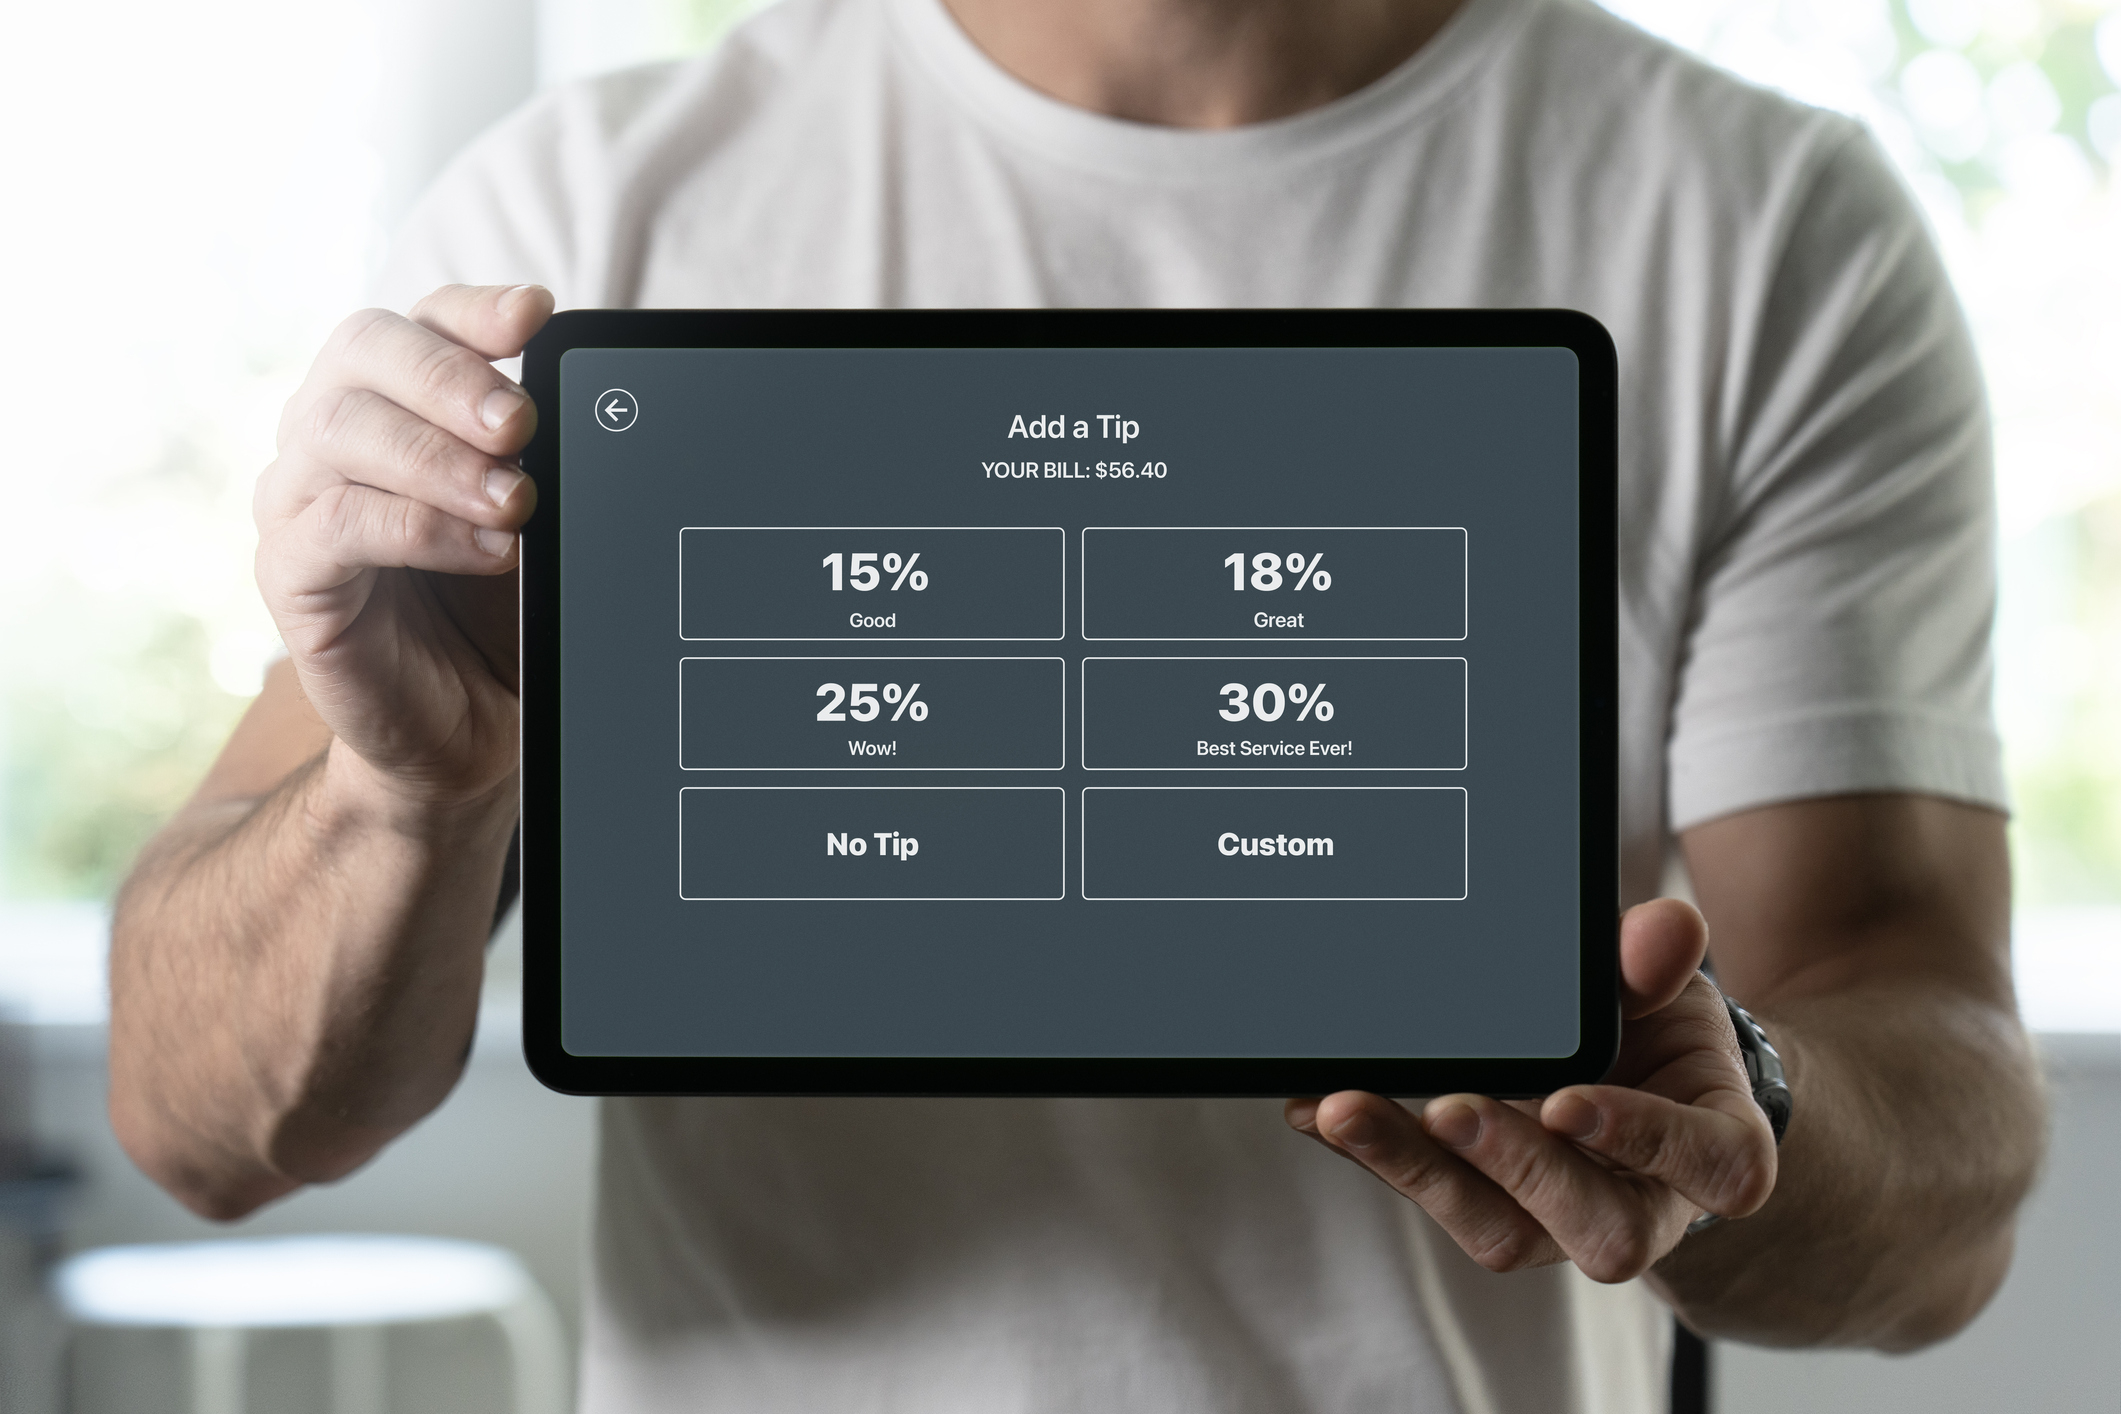 Person holding a tablet showing a tip selection screen with percentage options to add to a bill